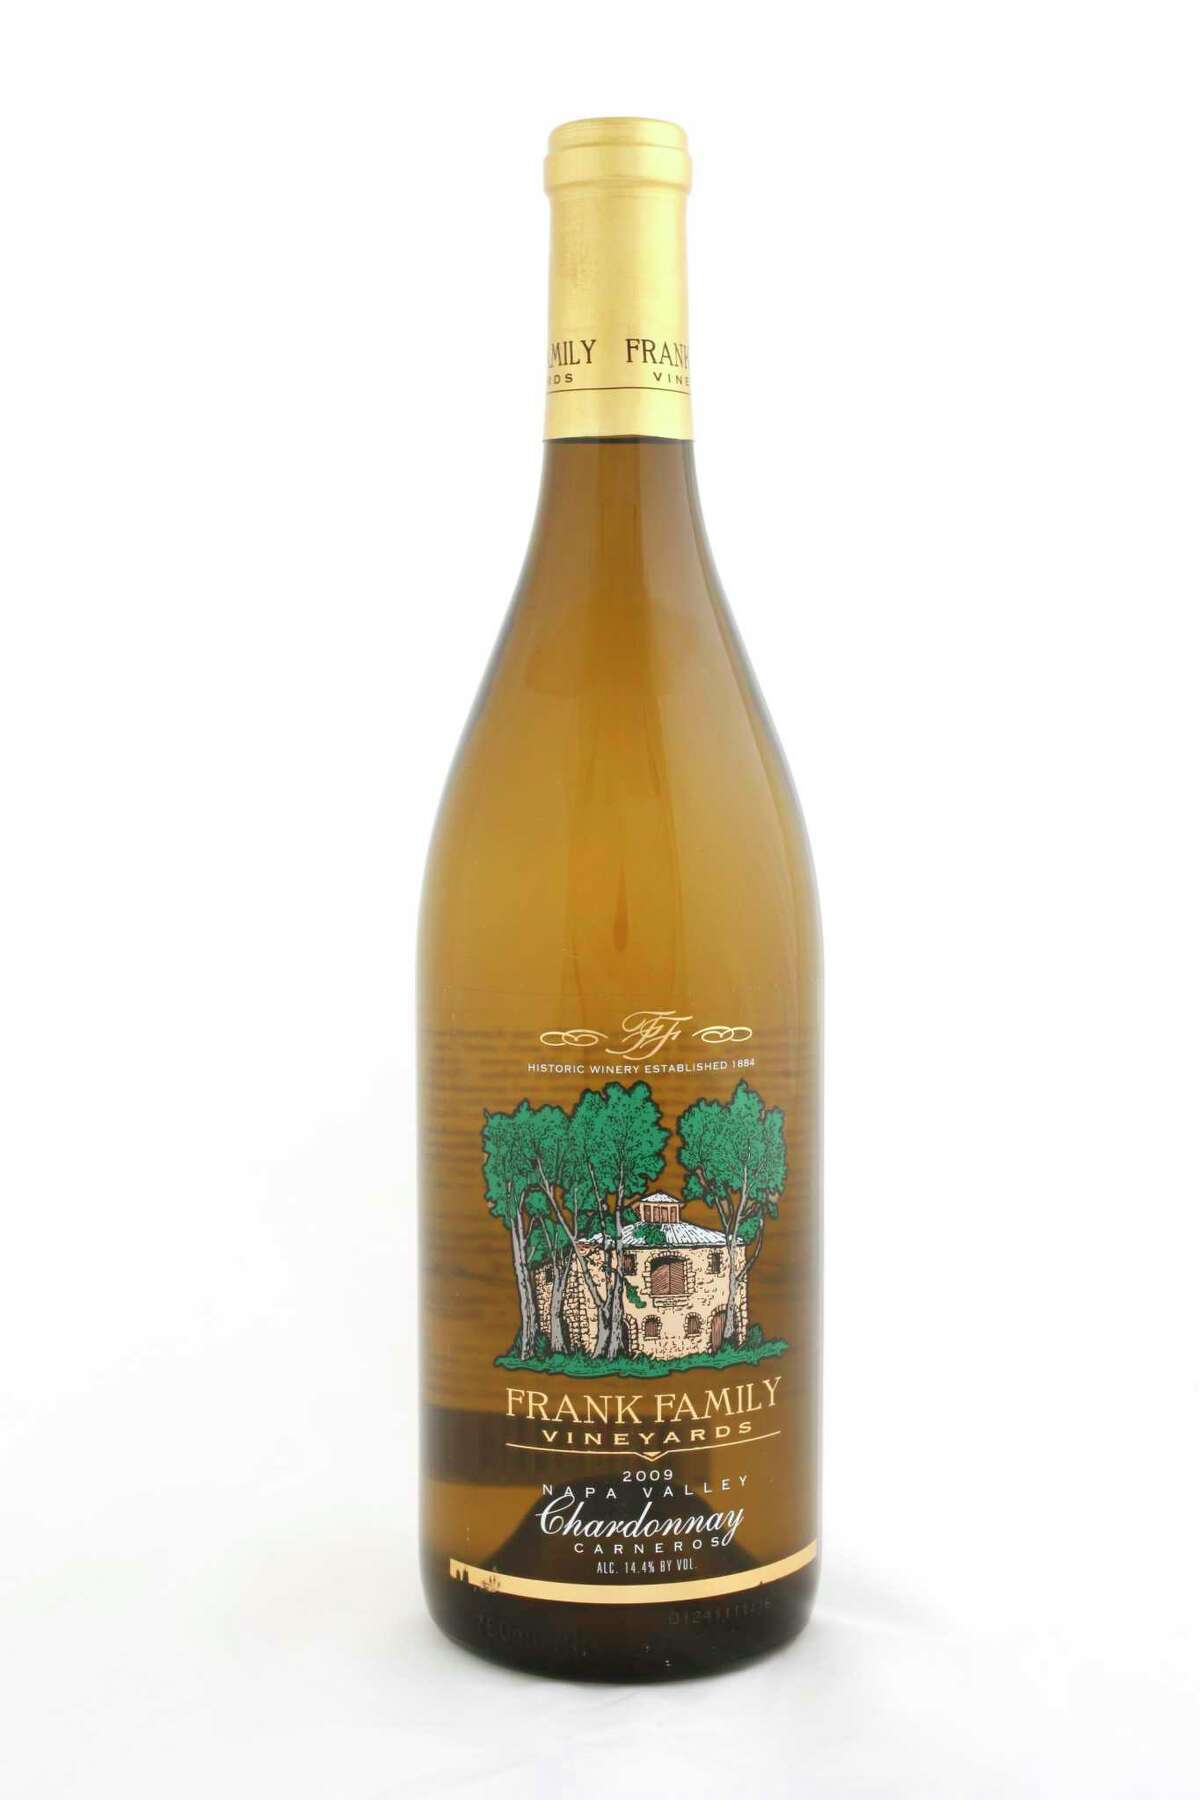 Frank Family is known for its popular Chardonnay.